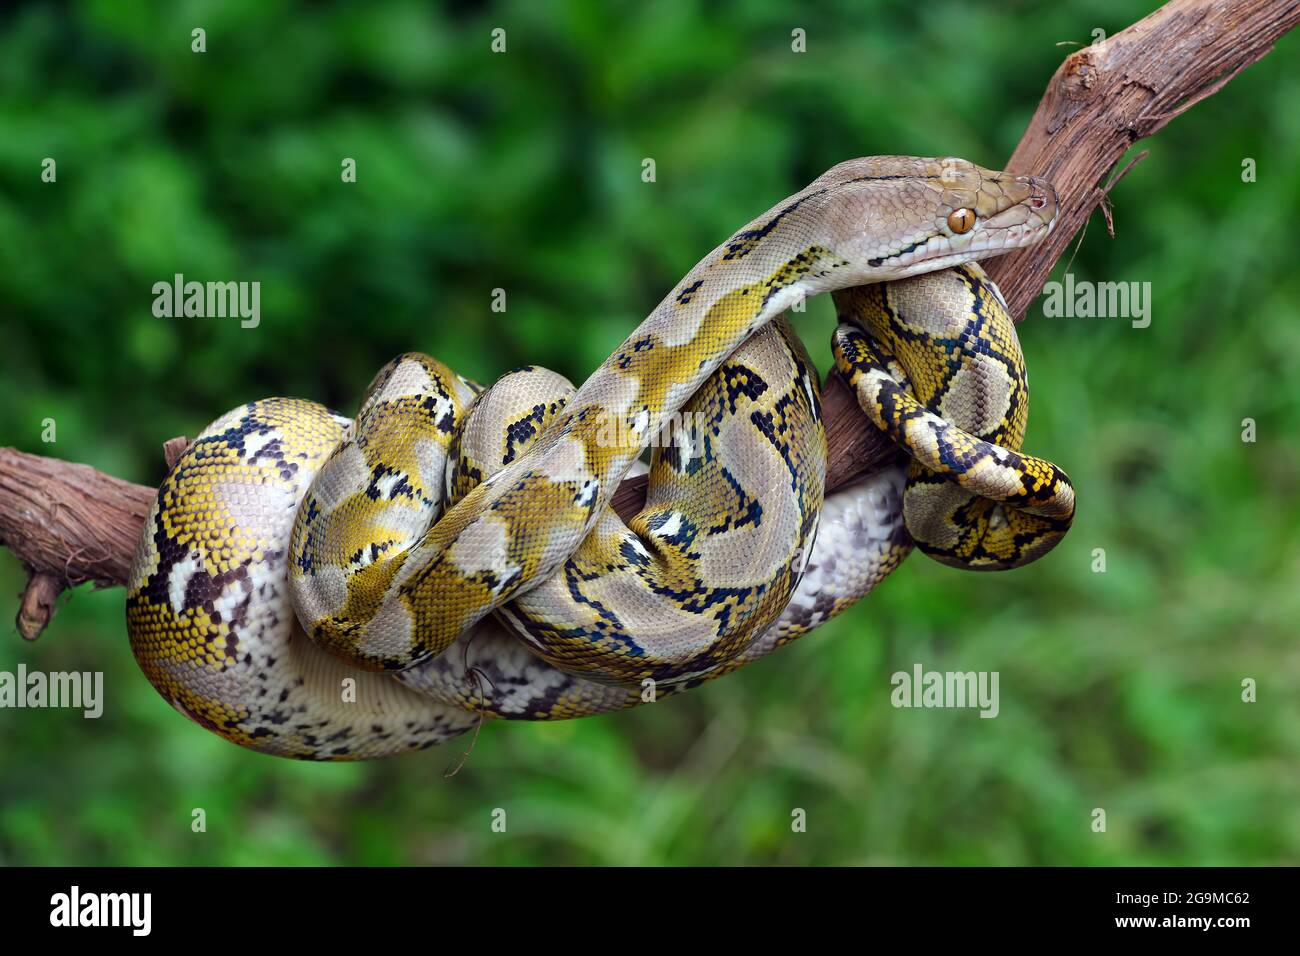 Python snakes dwell in tree trunks Stock Photo